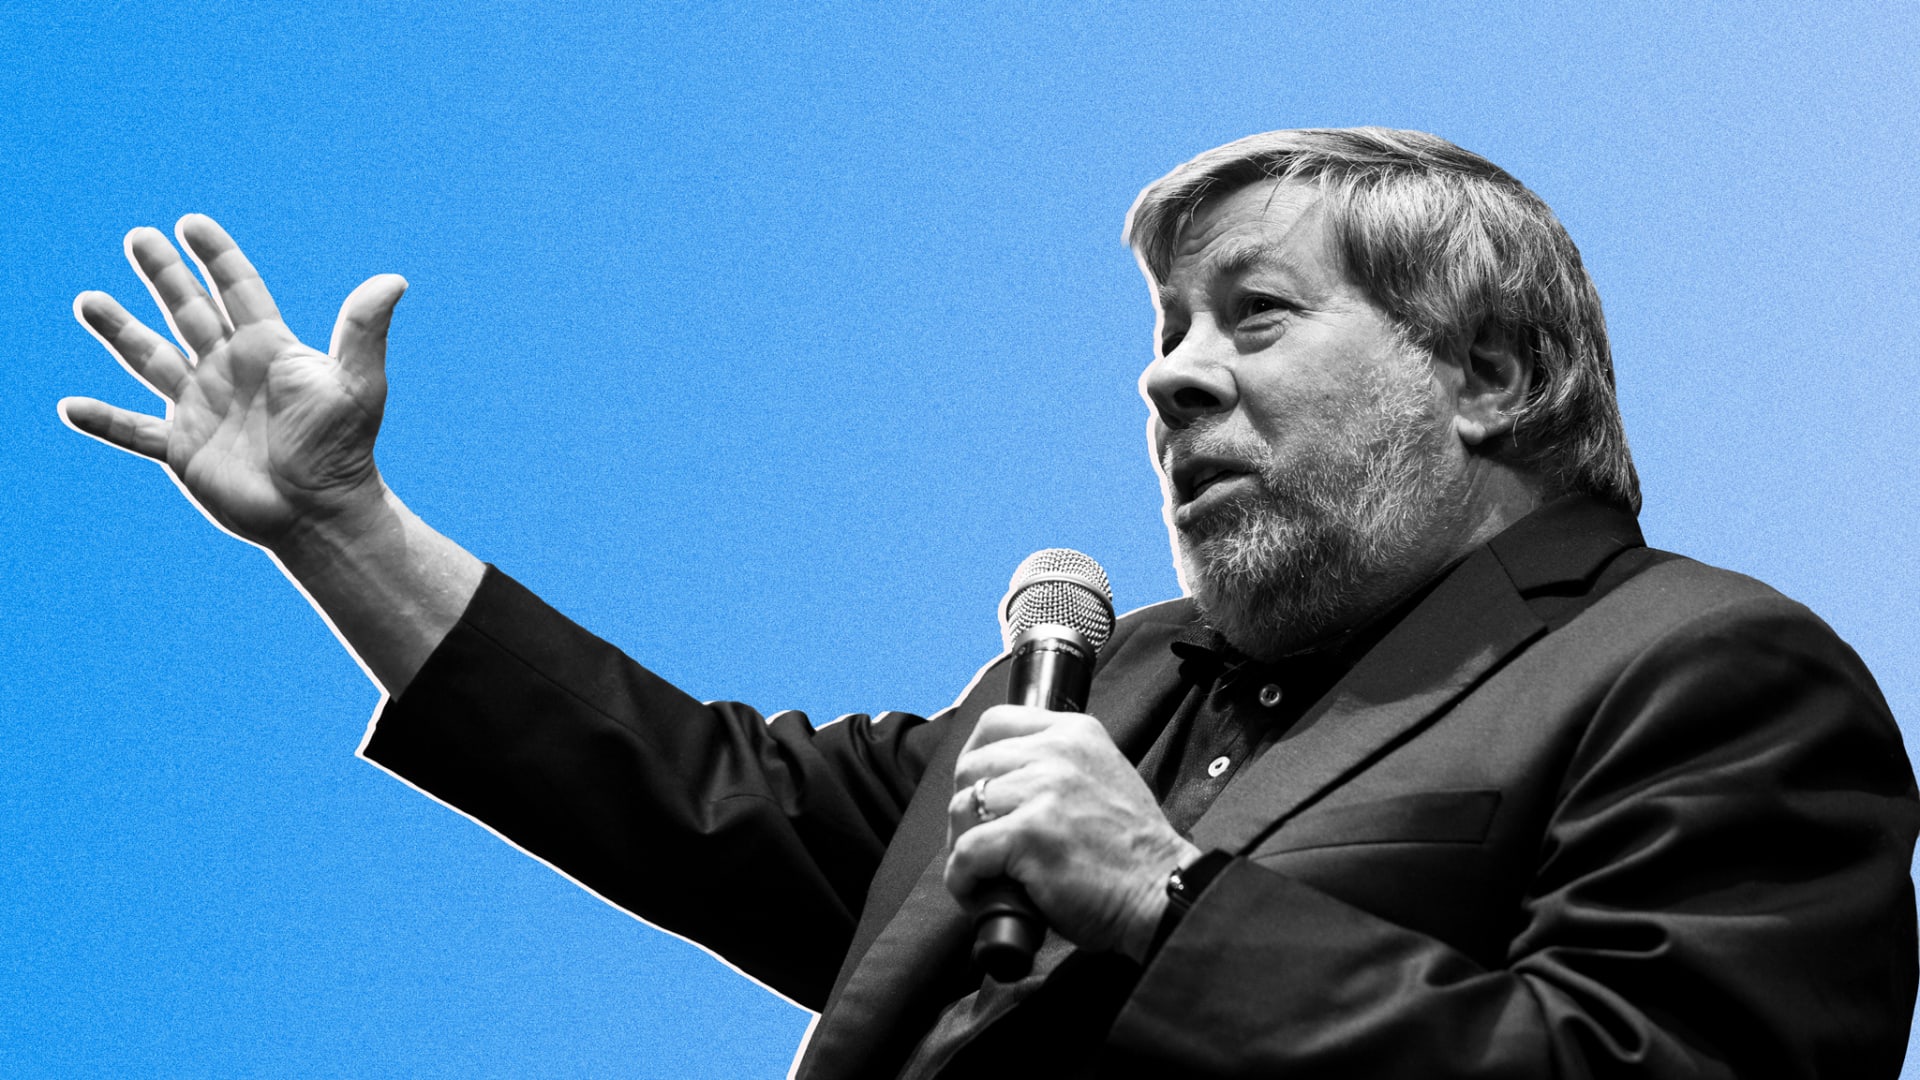 Steve Wozniak Says to Focus on These 3 Things When You Pitch Your Startup to Investors